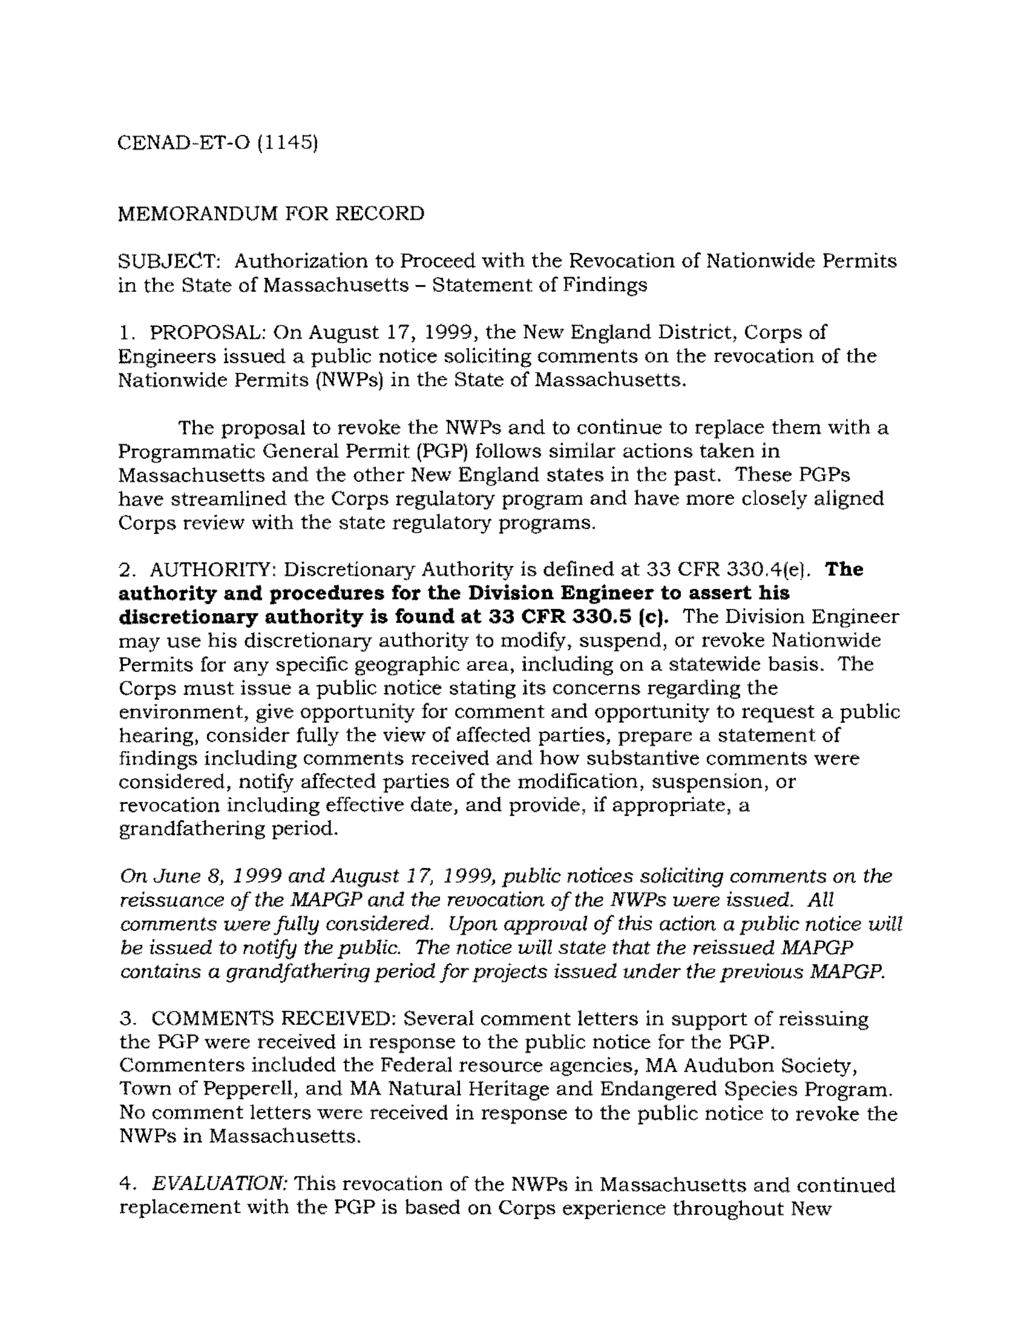 CENAD-ET-0 (1145) MEMORANDUM FOR RECORD SUBJECT: Authorization to Proceed with the Revocation of Nationwide Permits in the State of Massachusetts- Statement of Findings 1.